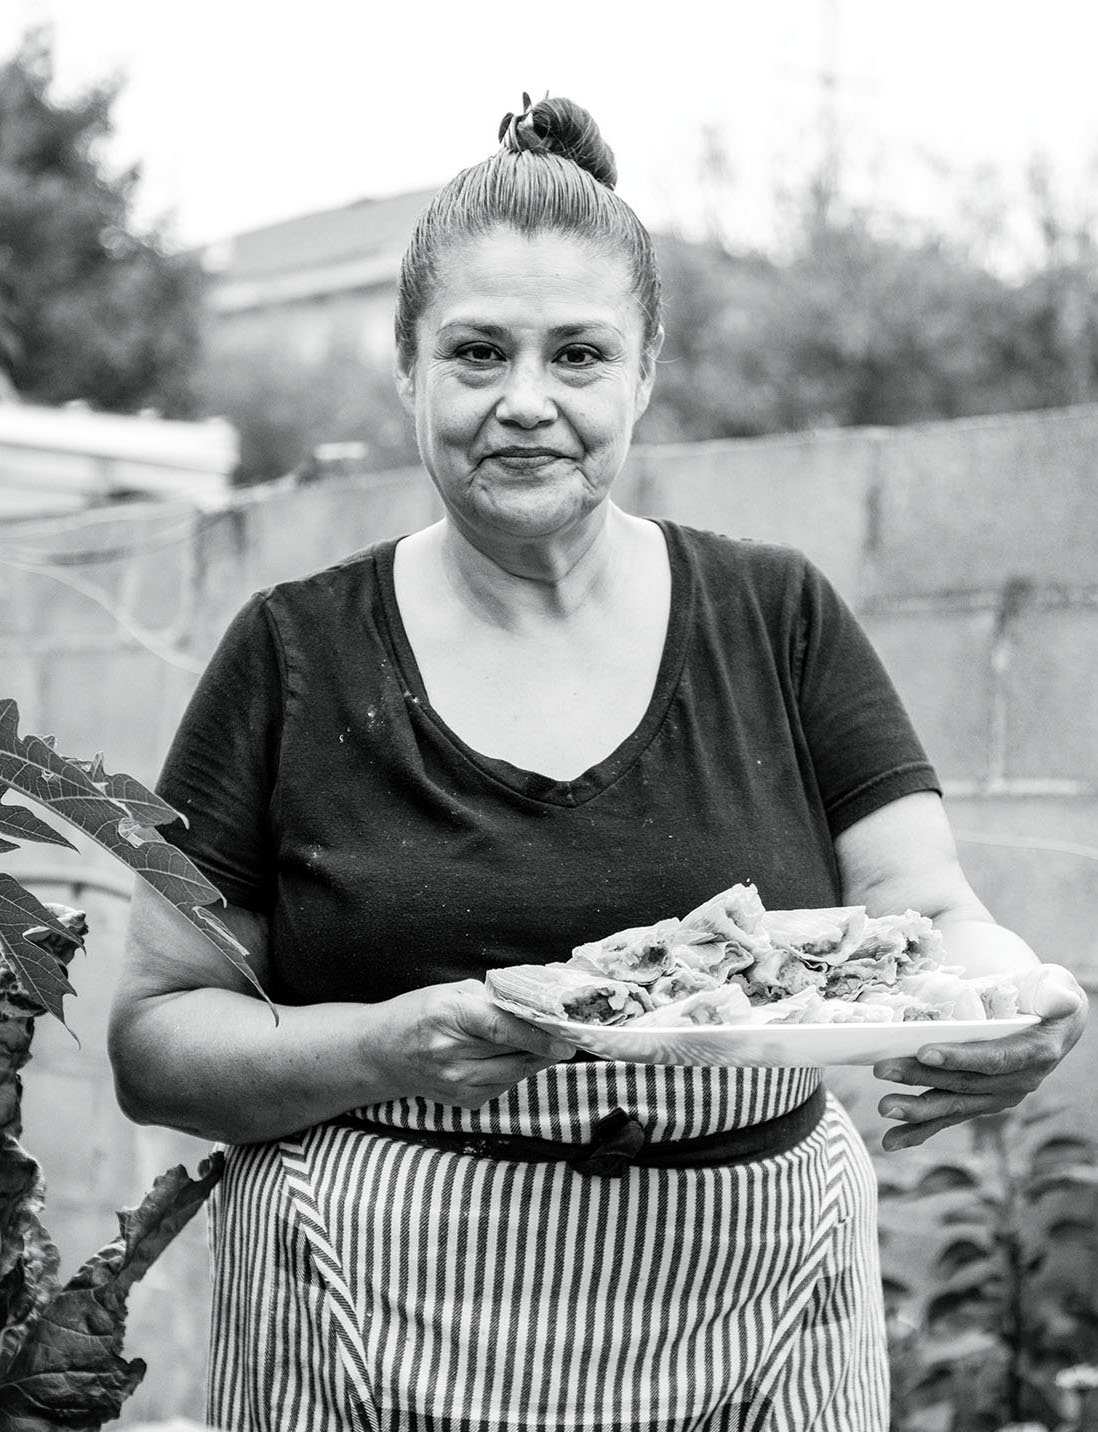 A woman wearing a pinstripe apron with her hair in a bun stands holding a large platter of tamales